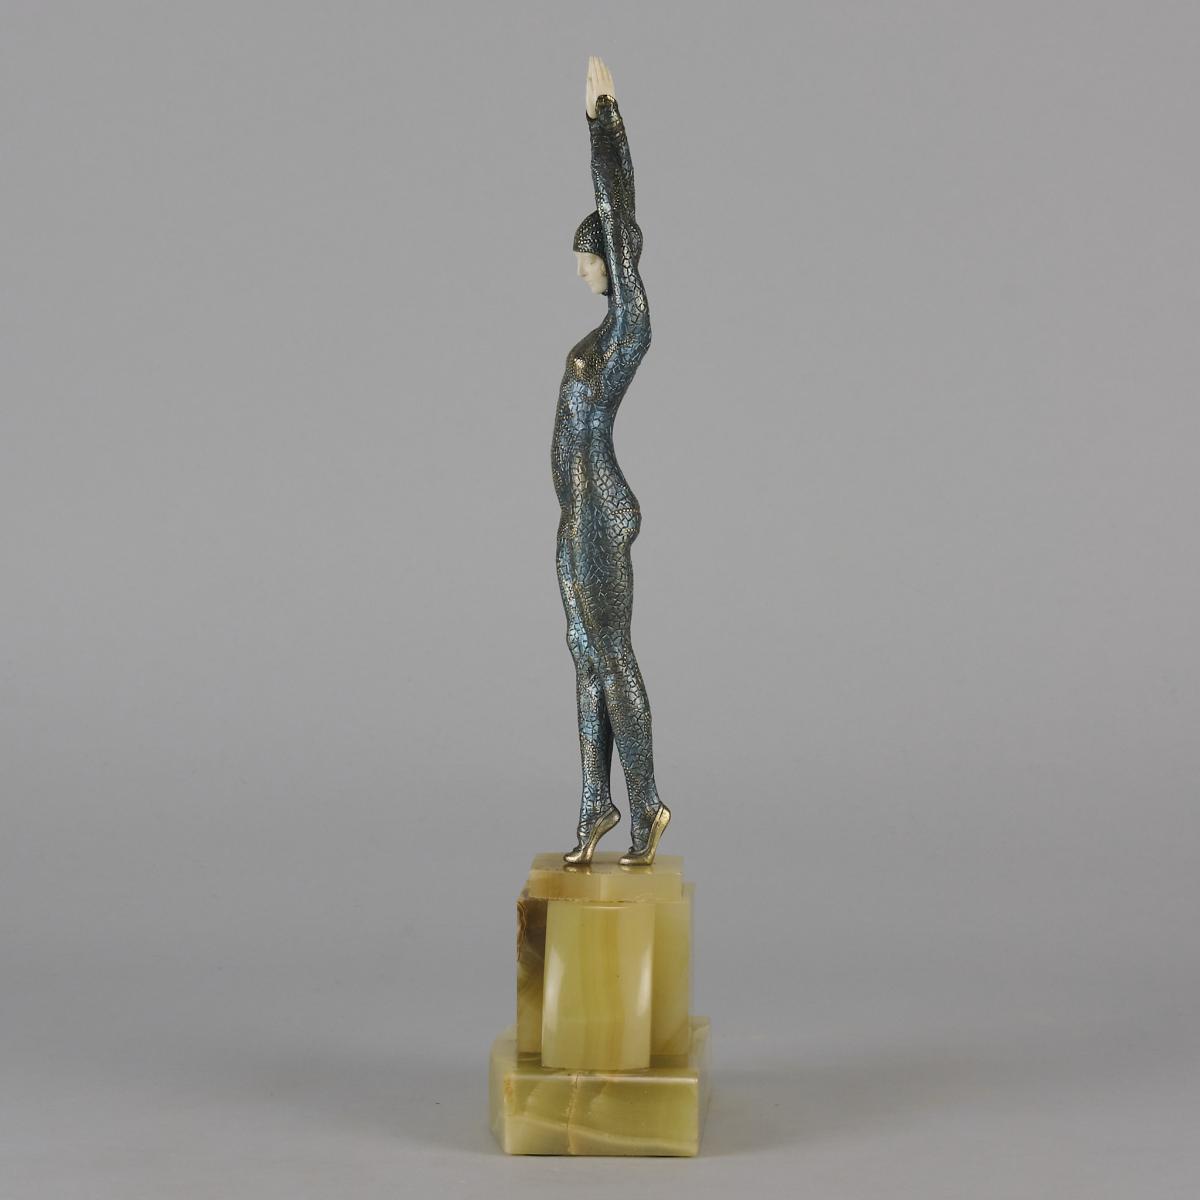 Art Deco bronze and Ivory sculpture entitled "Starfish" by Demetre Chiparus Circa: 1925